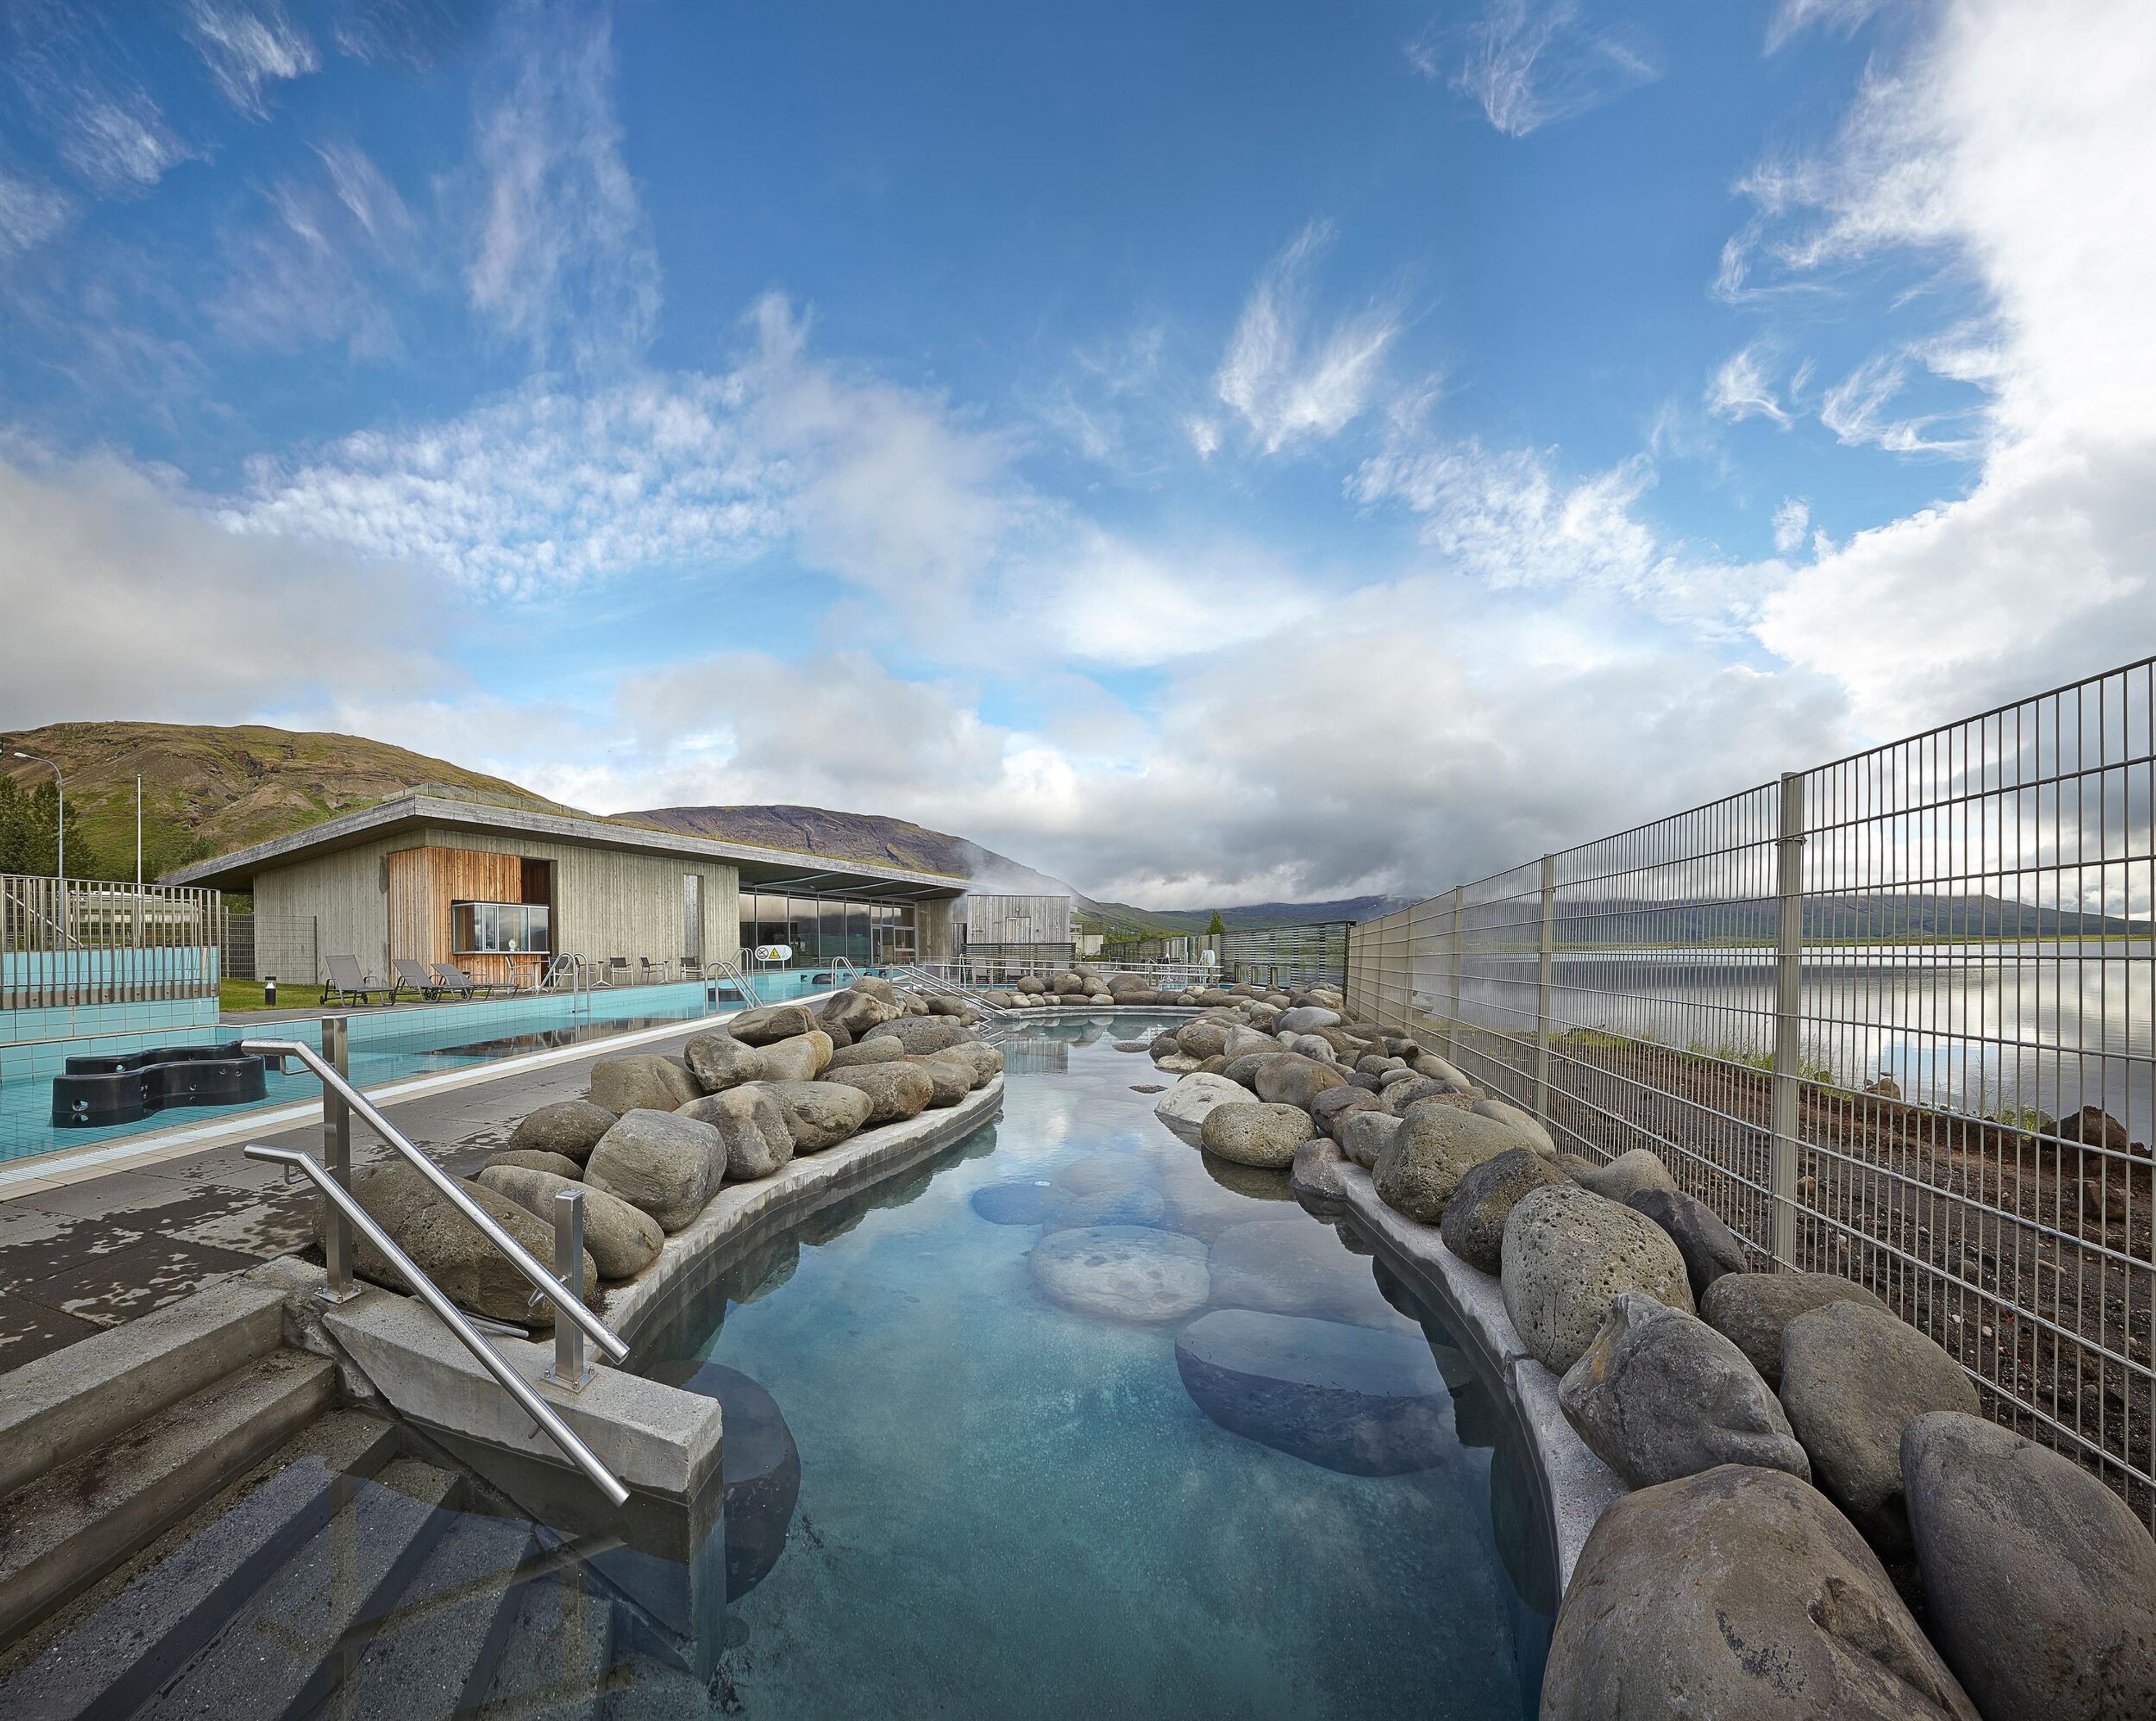  A tranquil geothermal pool surrounded by natural rocks, under a vast sky, providing an inviting setting for relaxation and reflection in a serene environment.